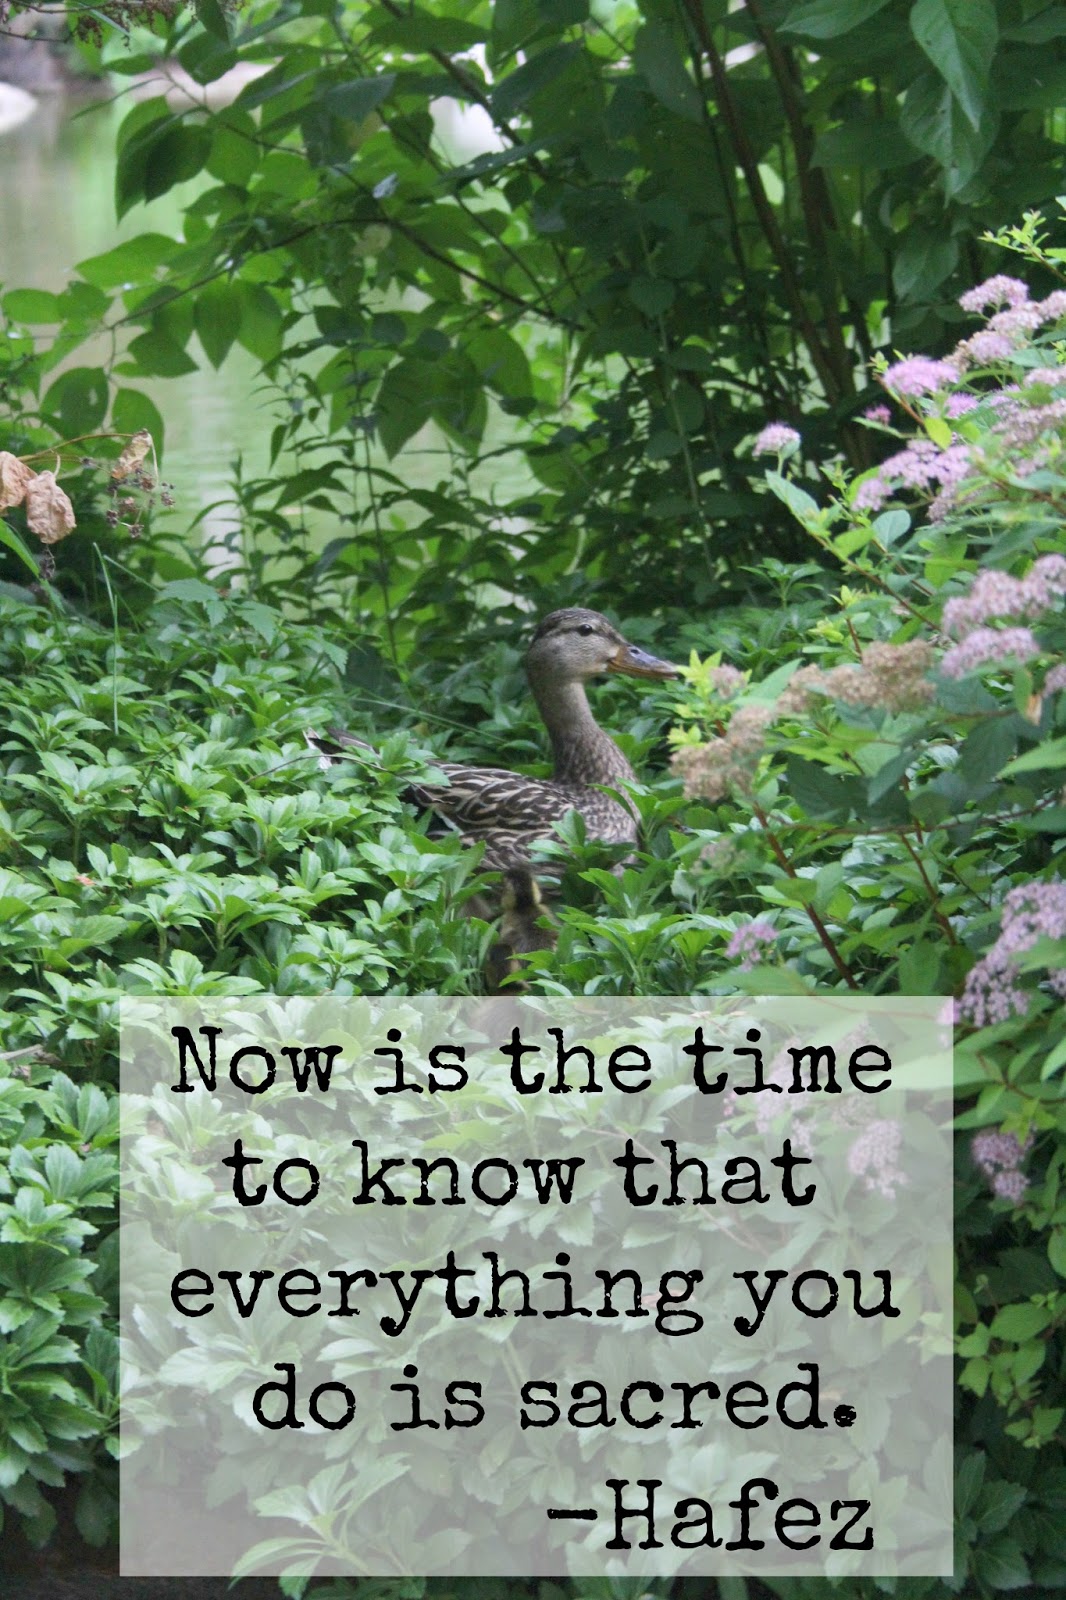 Hafez quote and photo of duck by Michele of Hello Lovely Studio. Now is the time to know that everything you do is sacred. #hafez #quote #hellolovelystudio #spirituality #nature